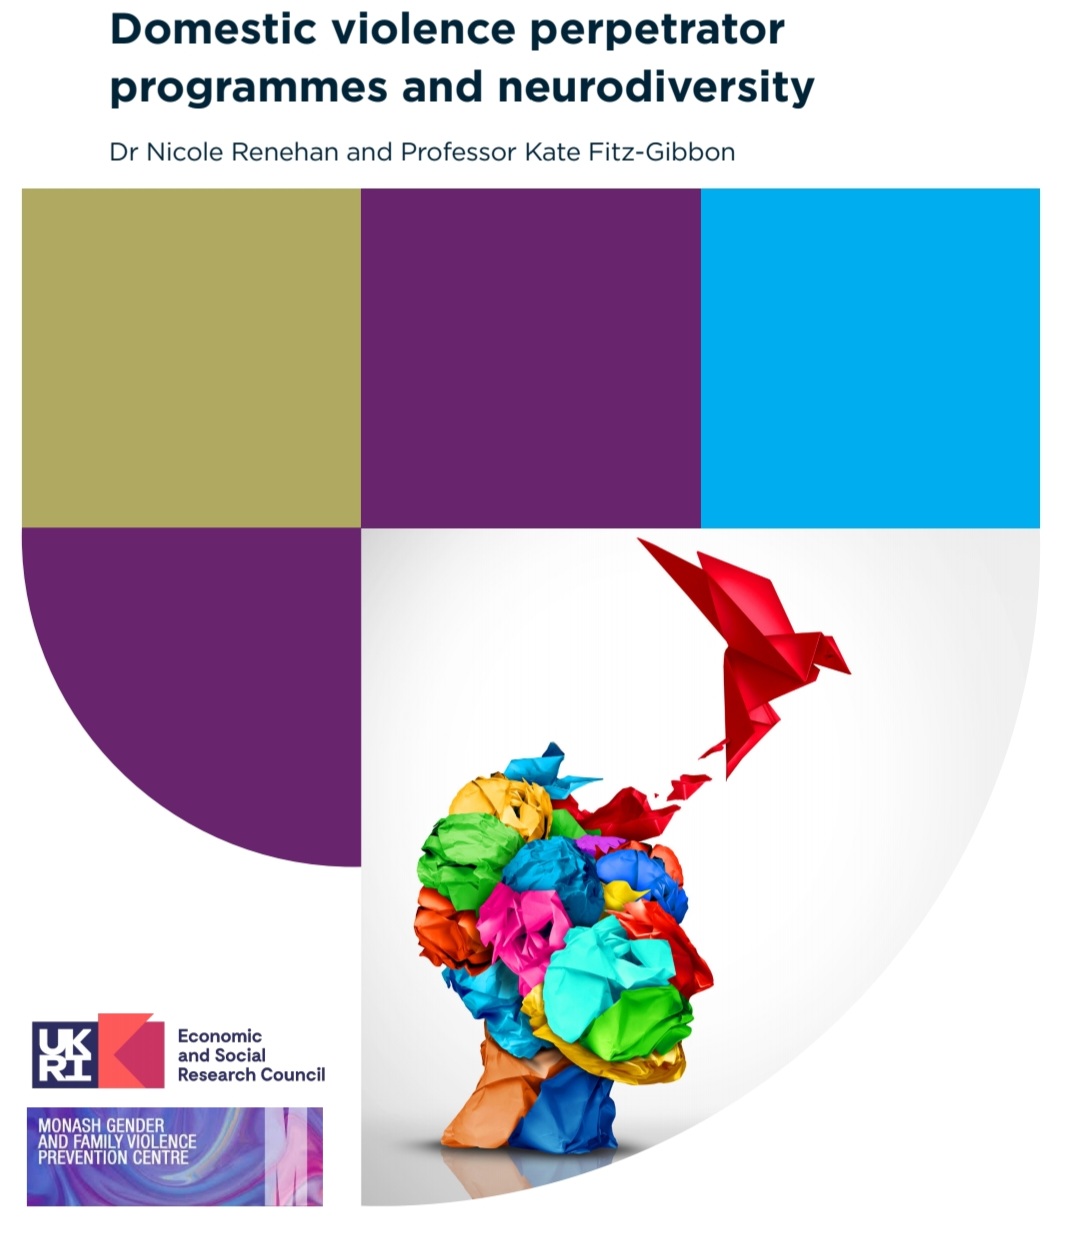 Front cover of report with Durham University colours and the logo for UKRI, Durham University and Monash Gender and Family Violence Prevention Centre.